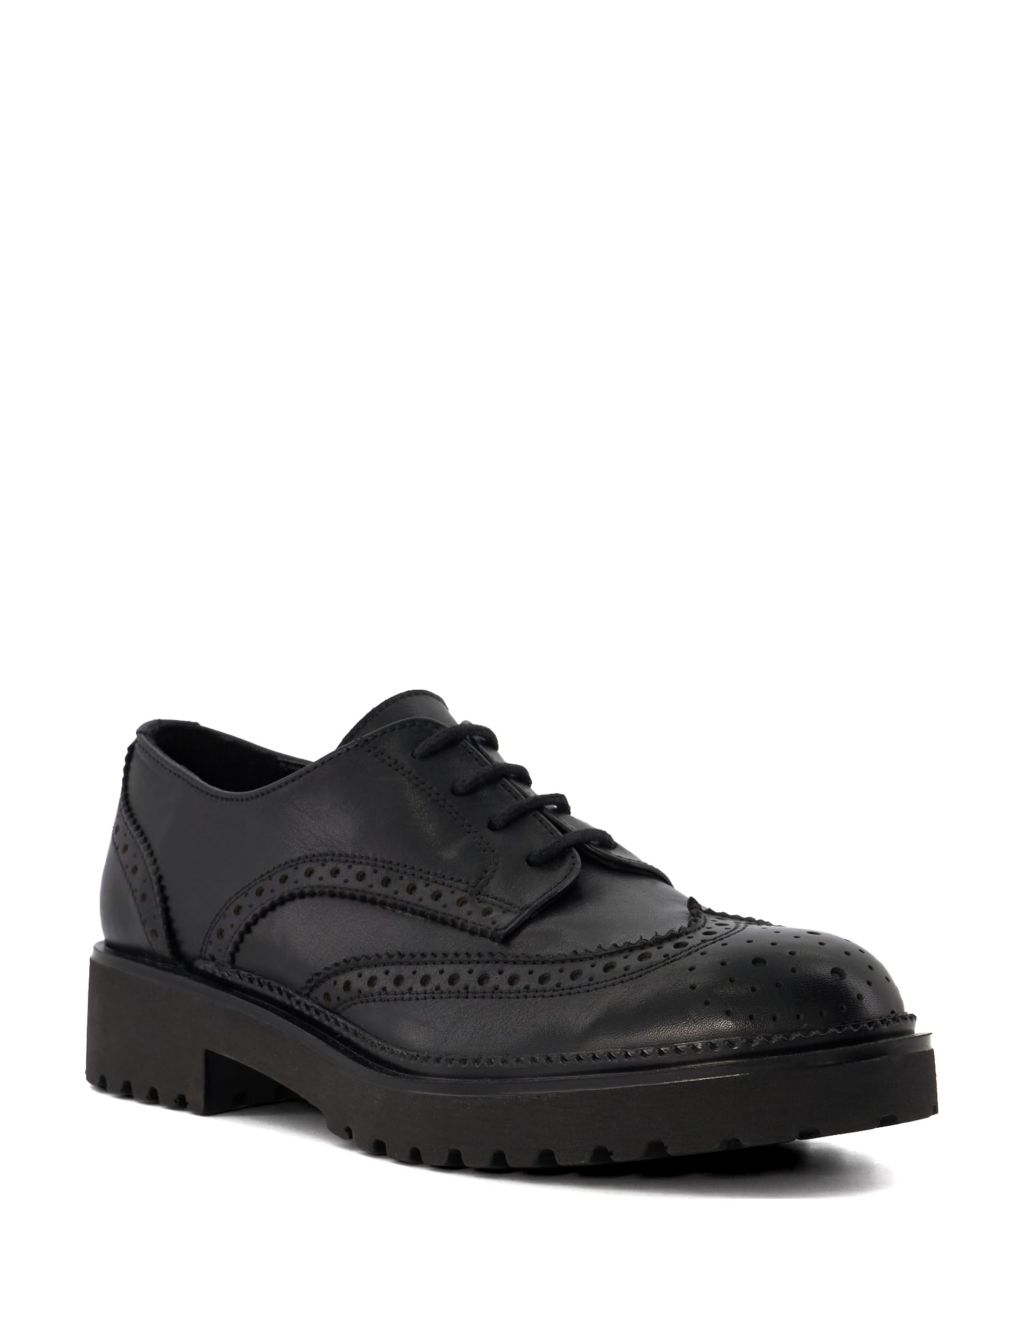 Leather Chunky Lace Up Brogues image 2